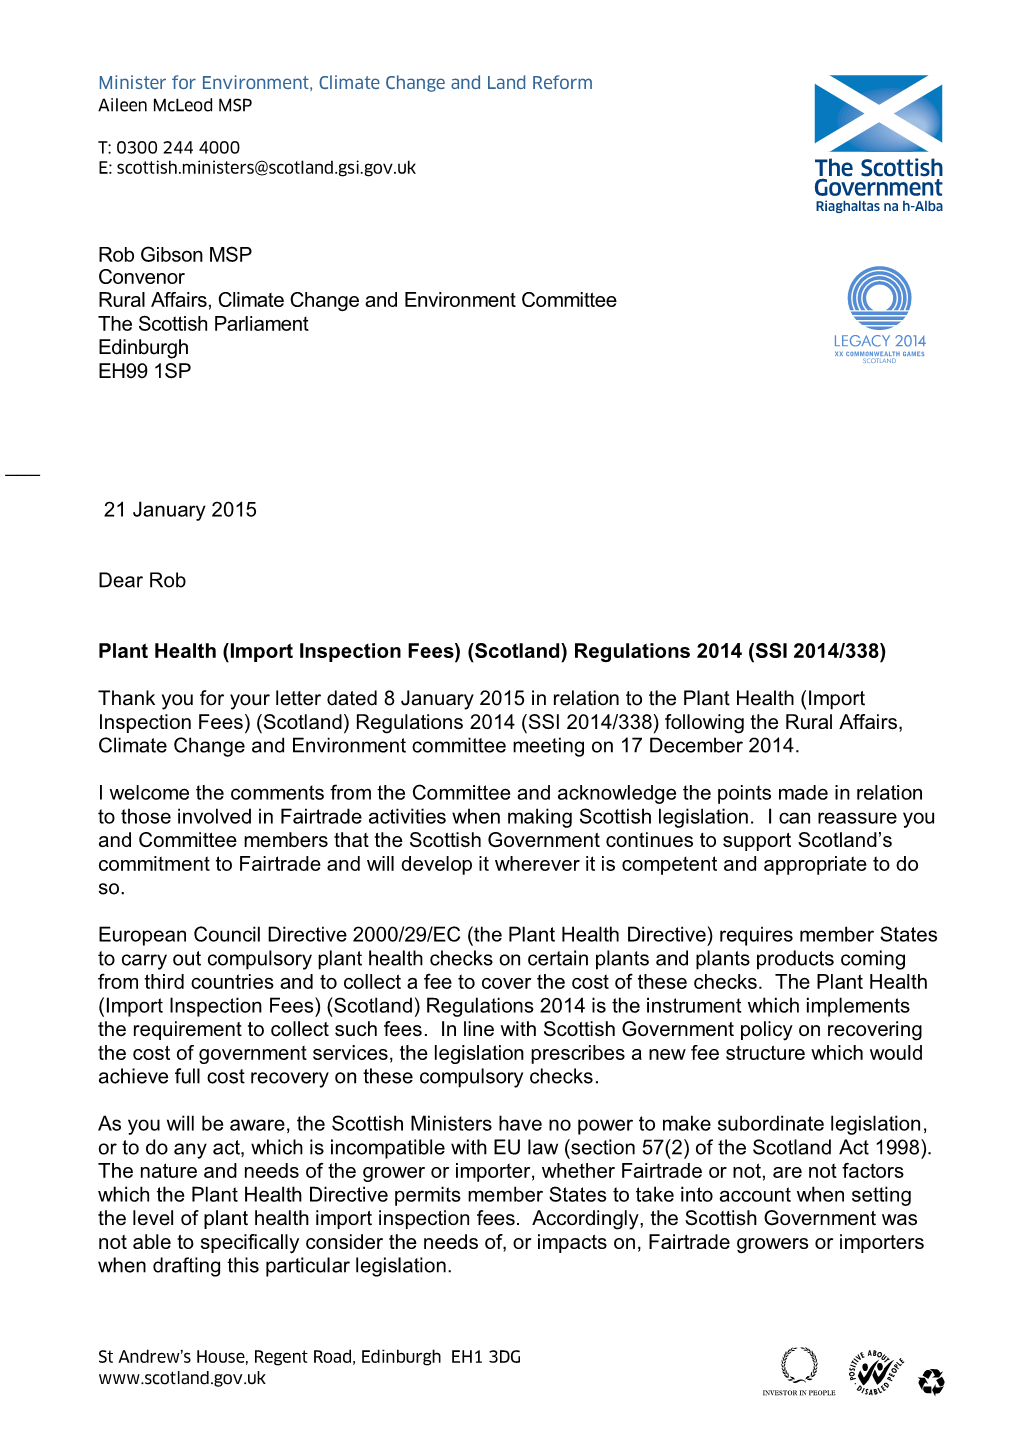 Letter from the Minister for Environment, Climate Change And